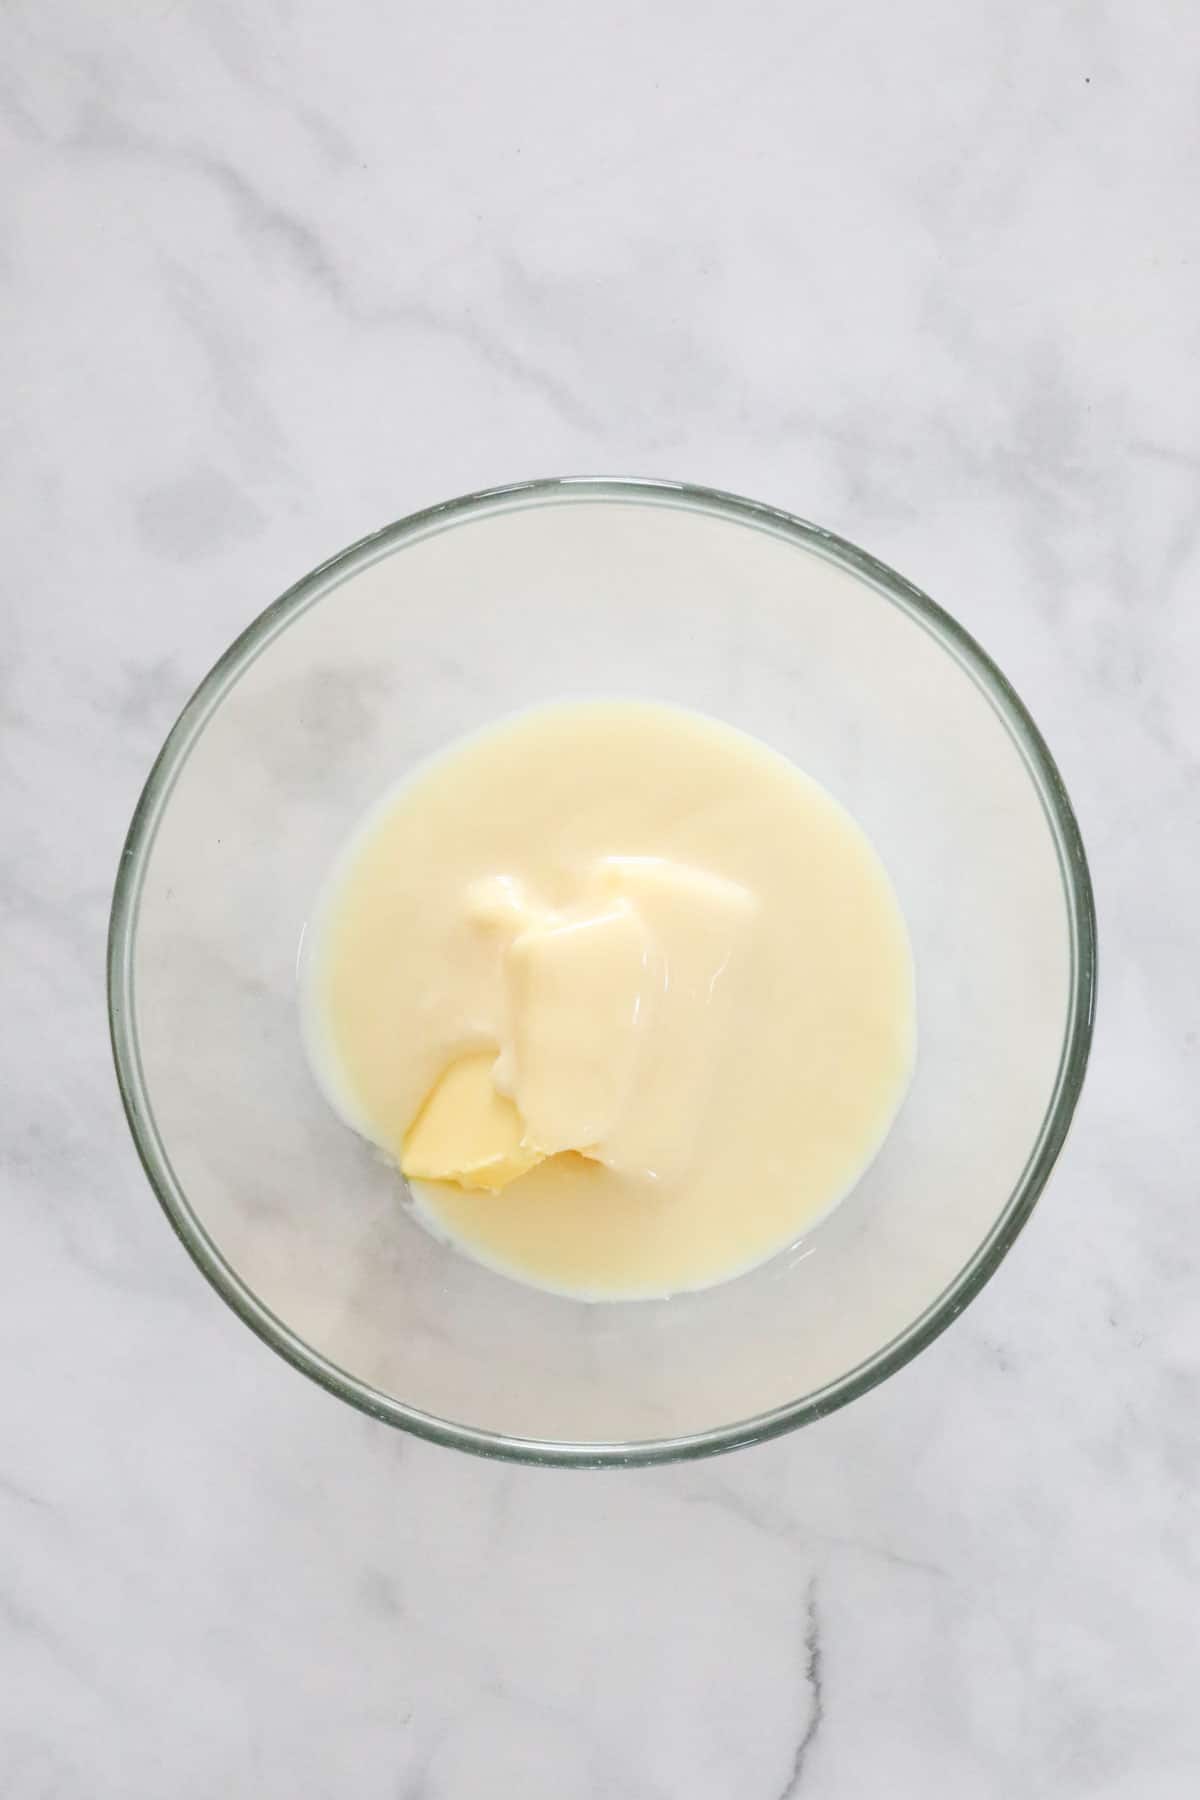 Butter and condensed milk in a glass bowl.